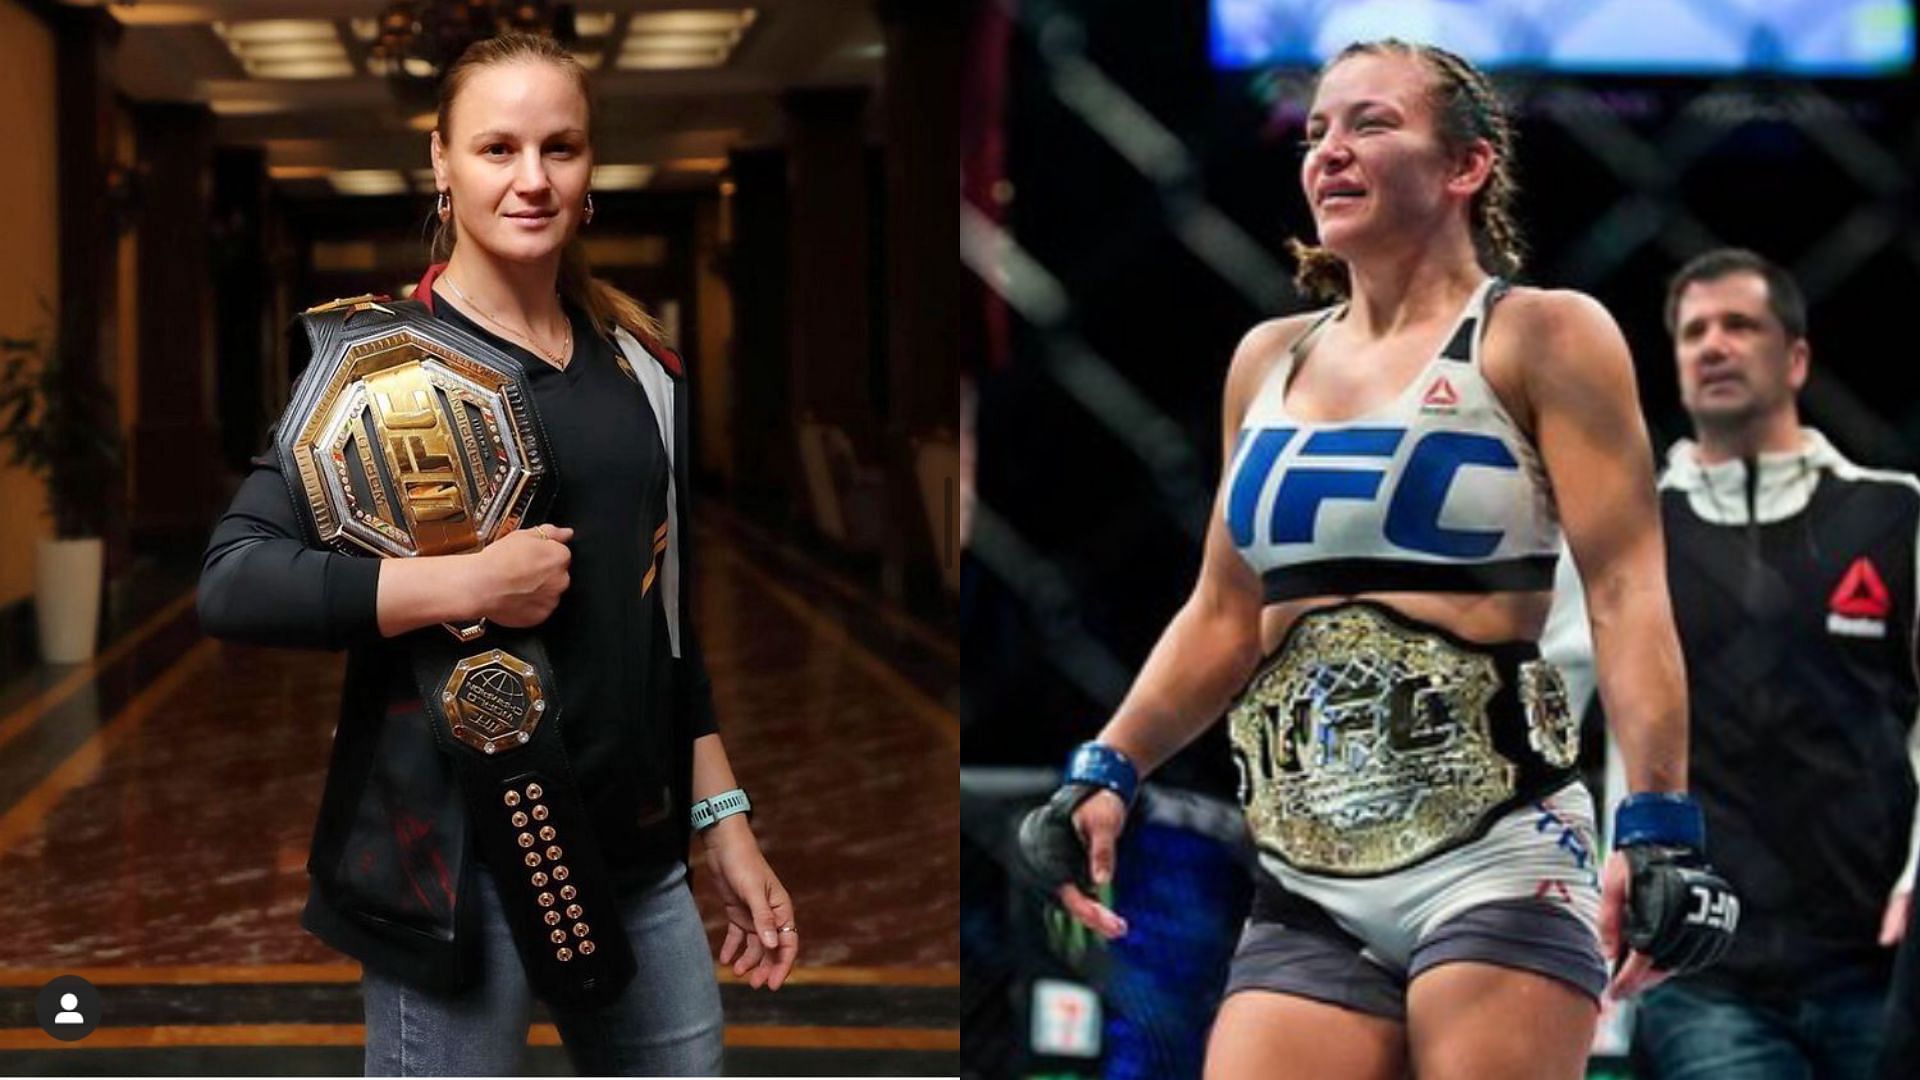 Valentina Shevchenko (left) and Miesha Tate (right) [Images Courtesy: @bulletvalentina and @mieshatate on Instagram]